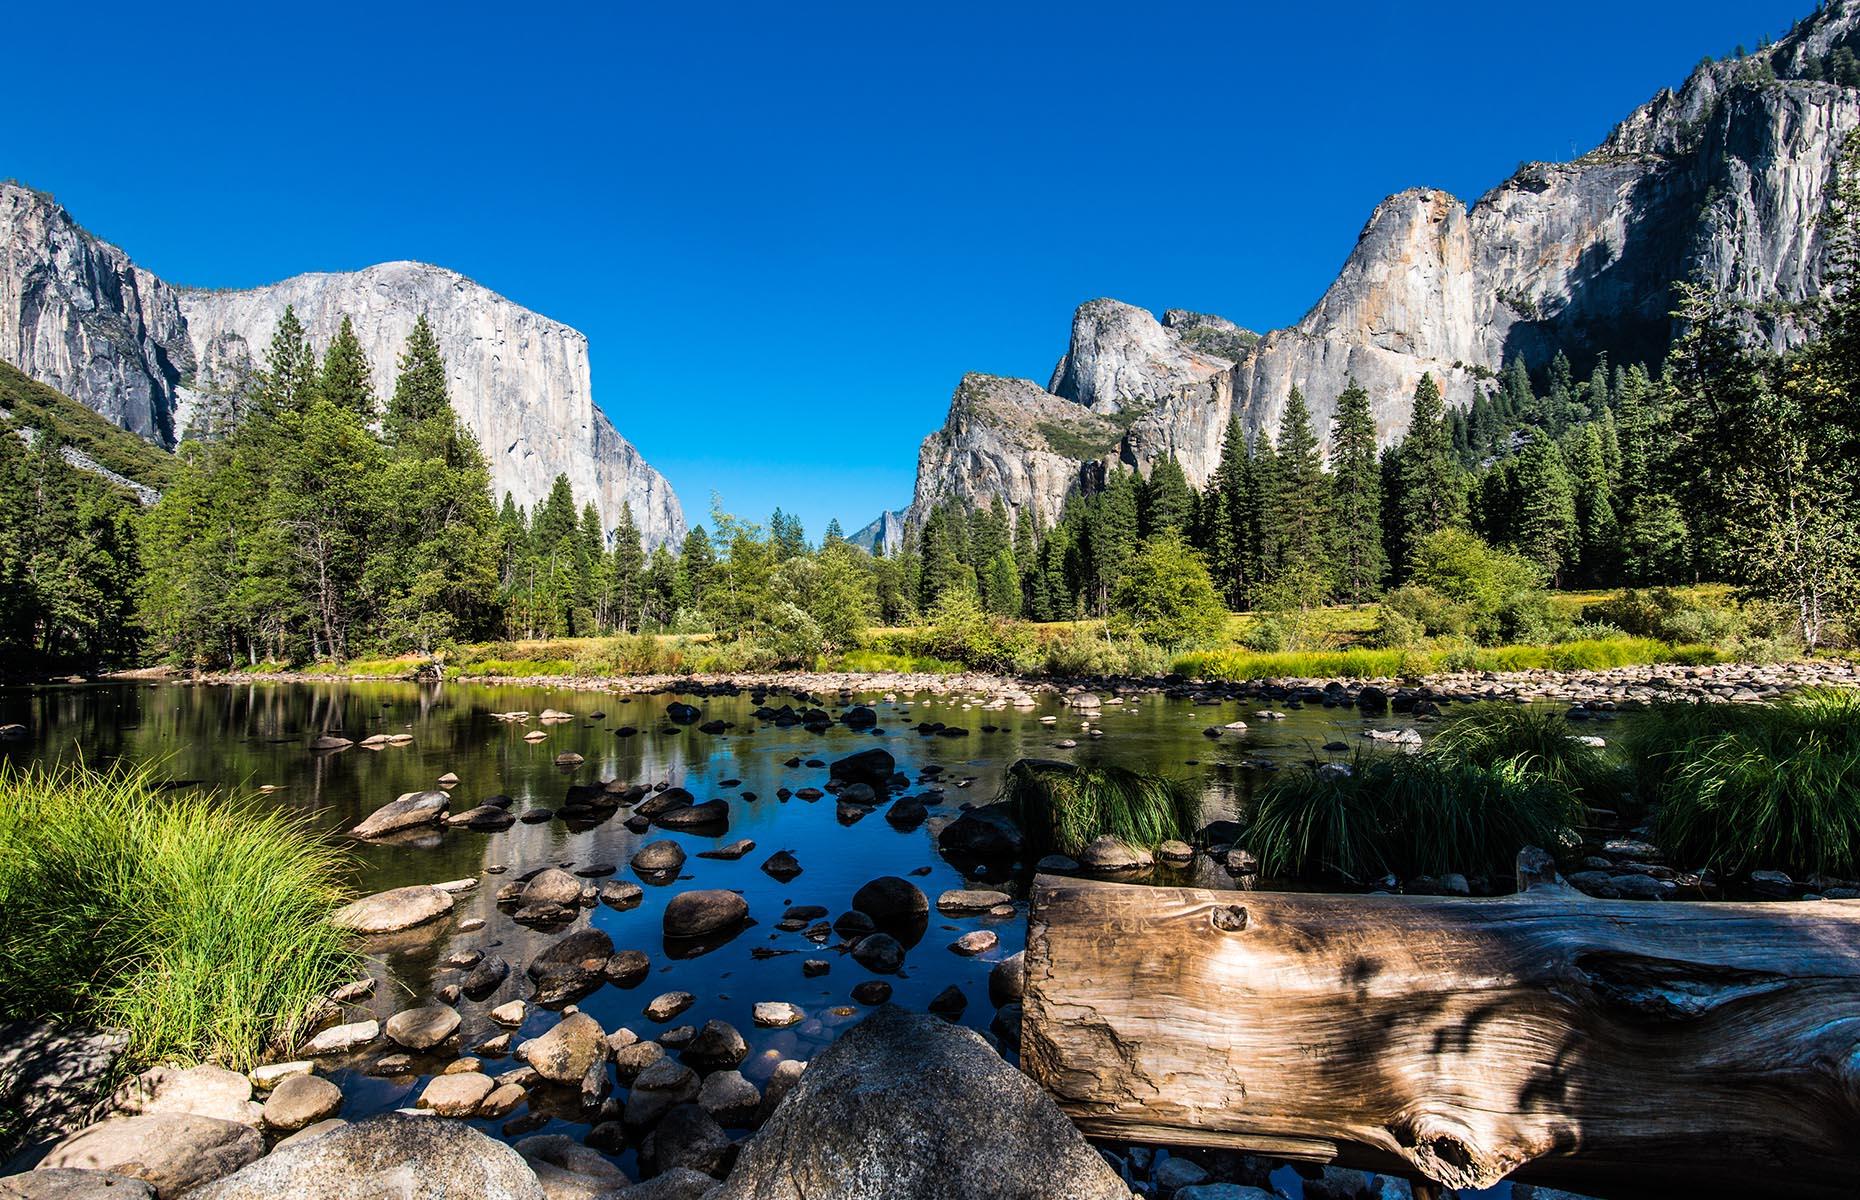 <p>Only a short distance from the Californian city is the spectacular <a href="https://www.nps.gov/yose/index.htm">Yosemite National Park</a>. With its enormous, ancient trees, thundering waterfalls and towering, vertiginous cliffs, it’s a visual spectacle. Activities here include skiing, swimming, hiking, horse riding, biking and fishing. Currently, reservations are required to visit the park.</p>